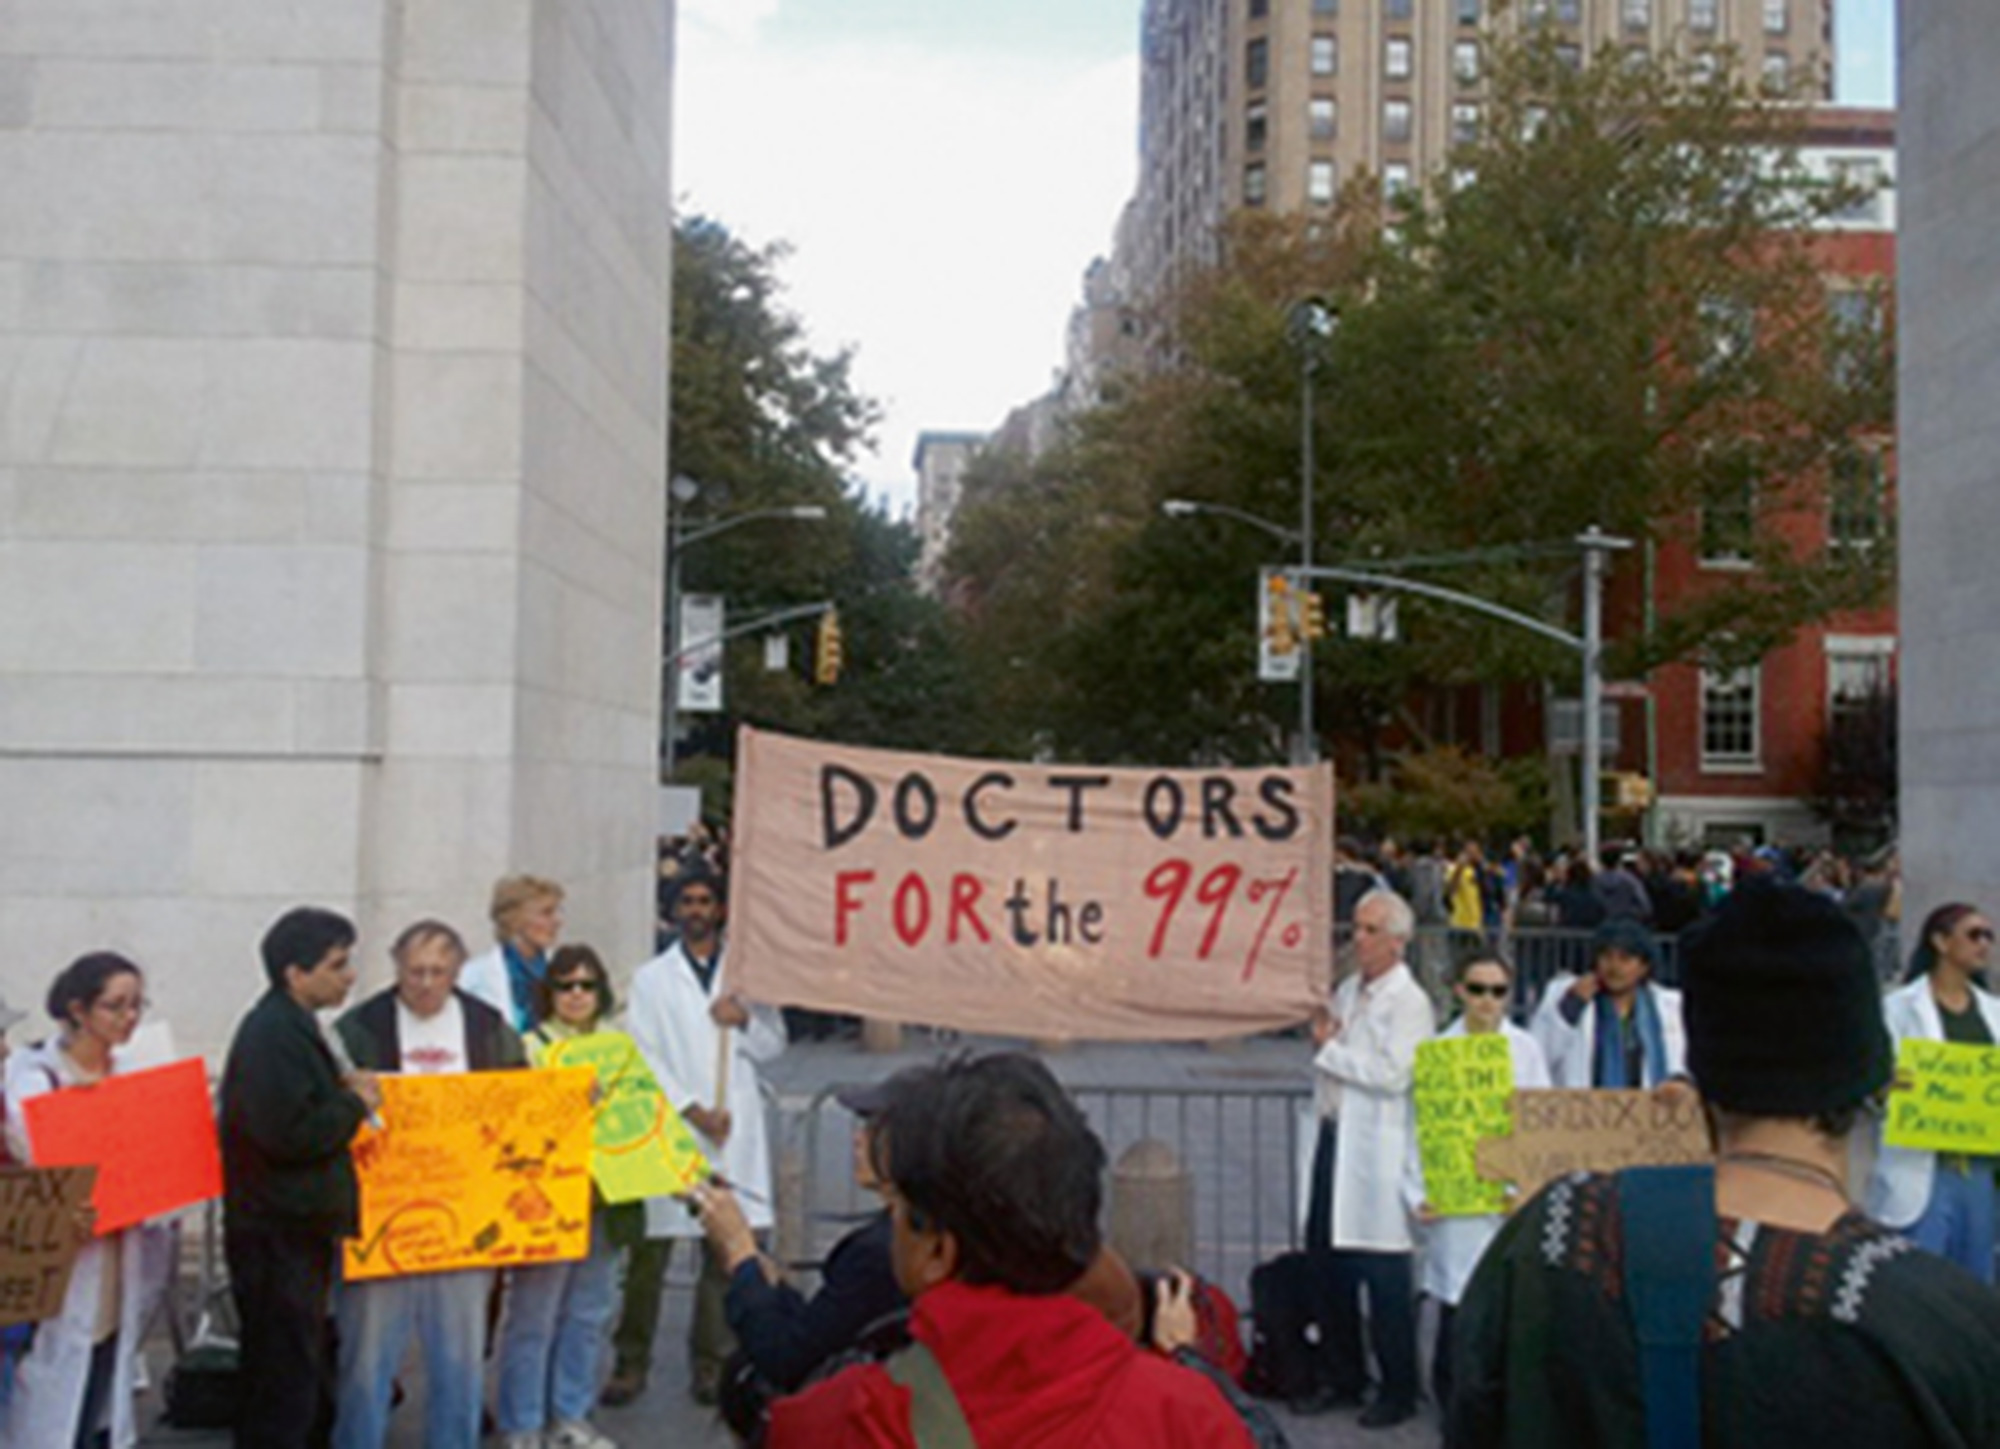 A twenty eleven photograph of a protest sign that reads “Doctors for the ninety-nine percent.”